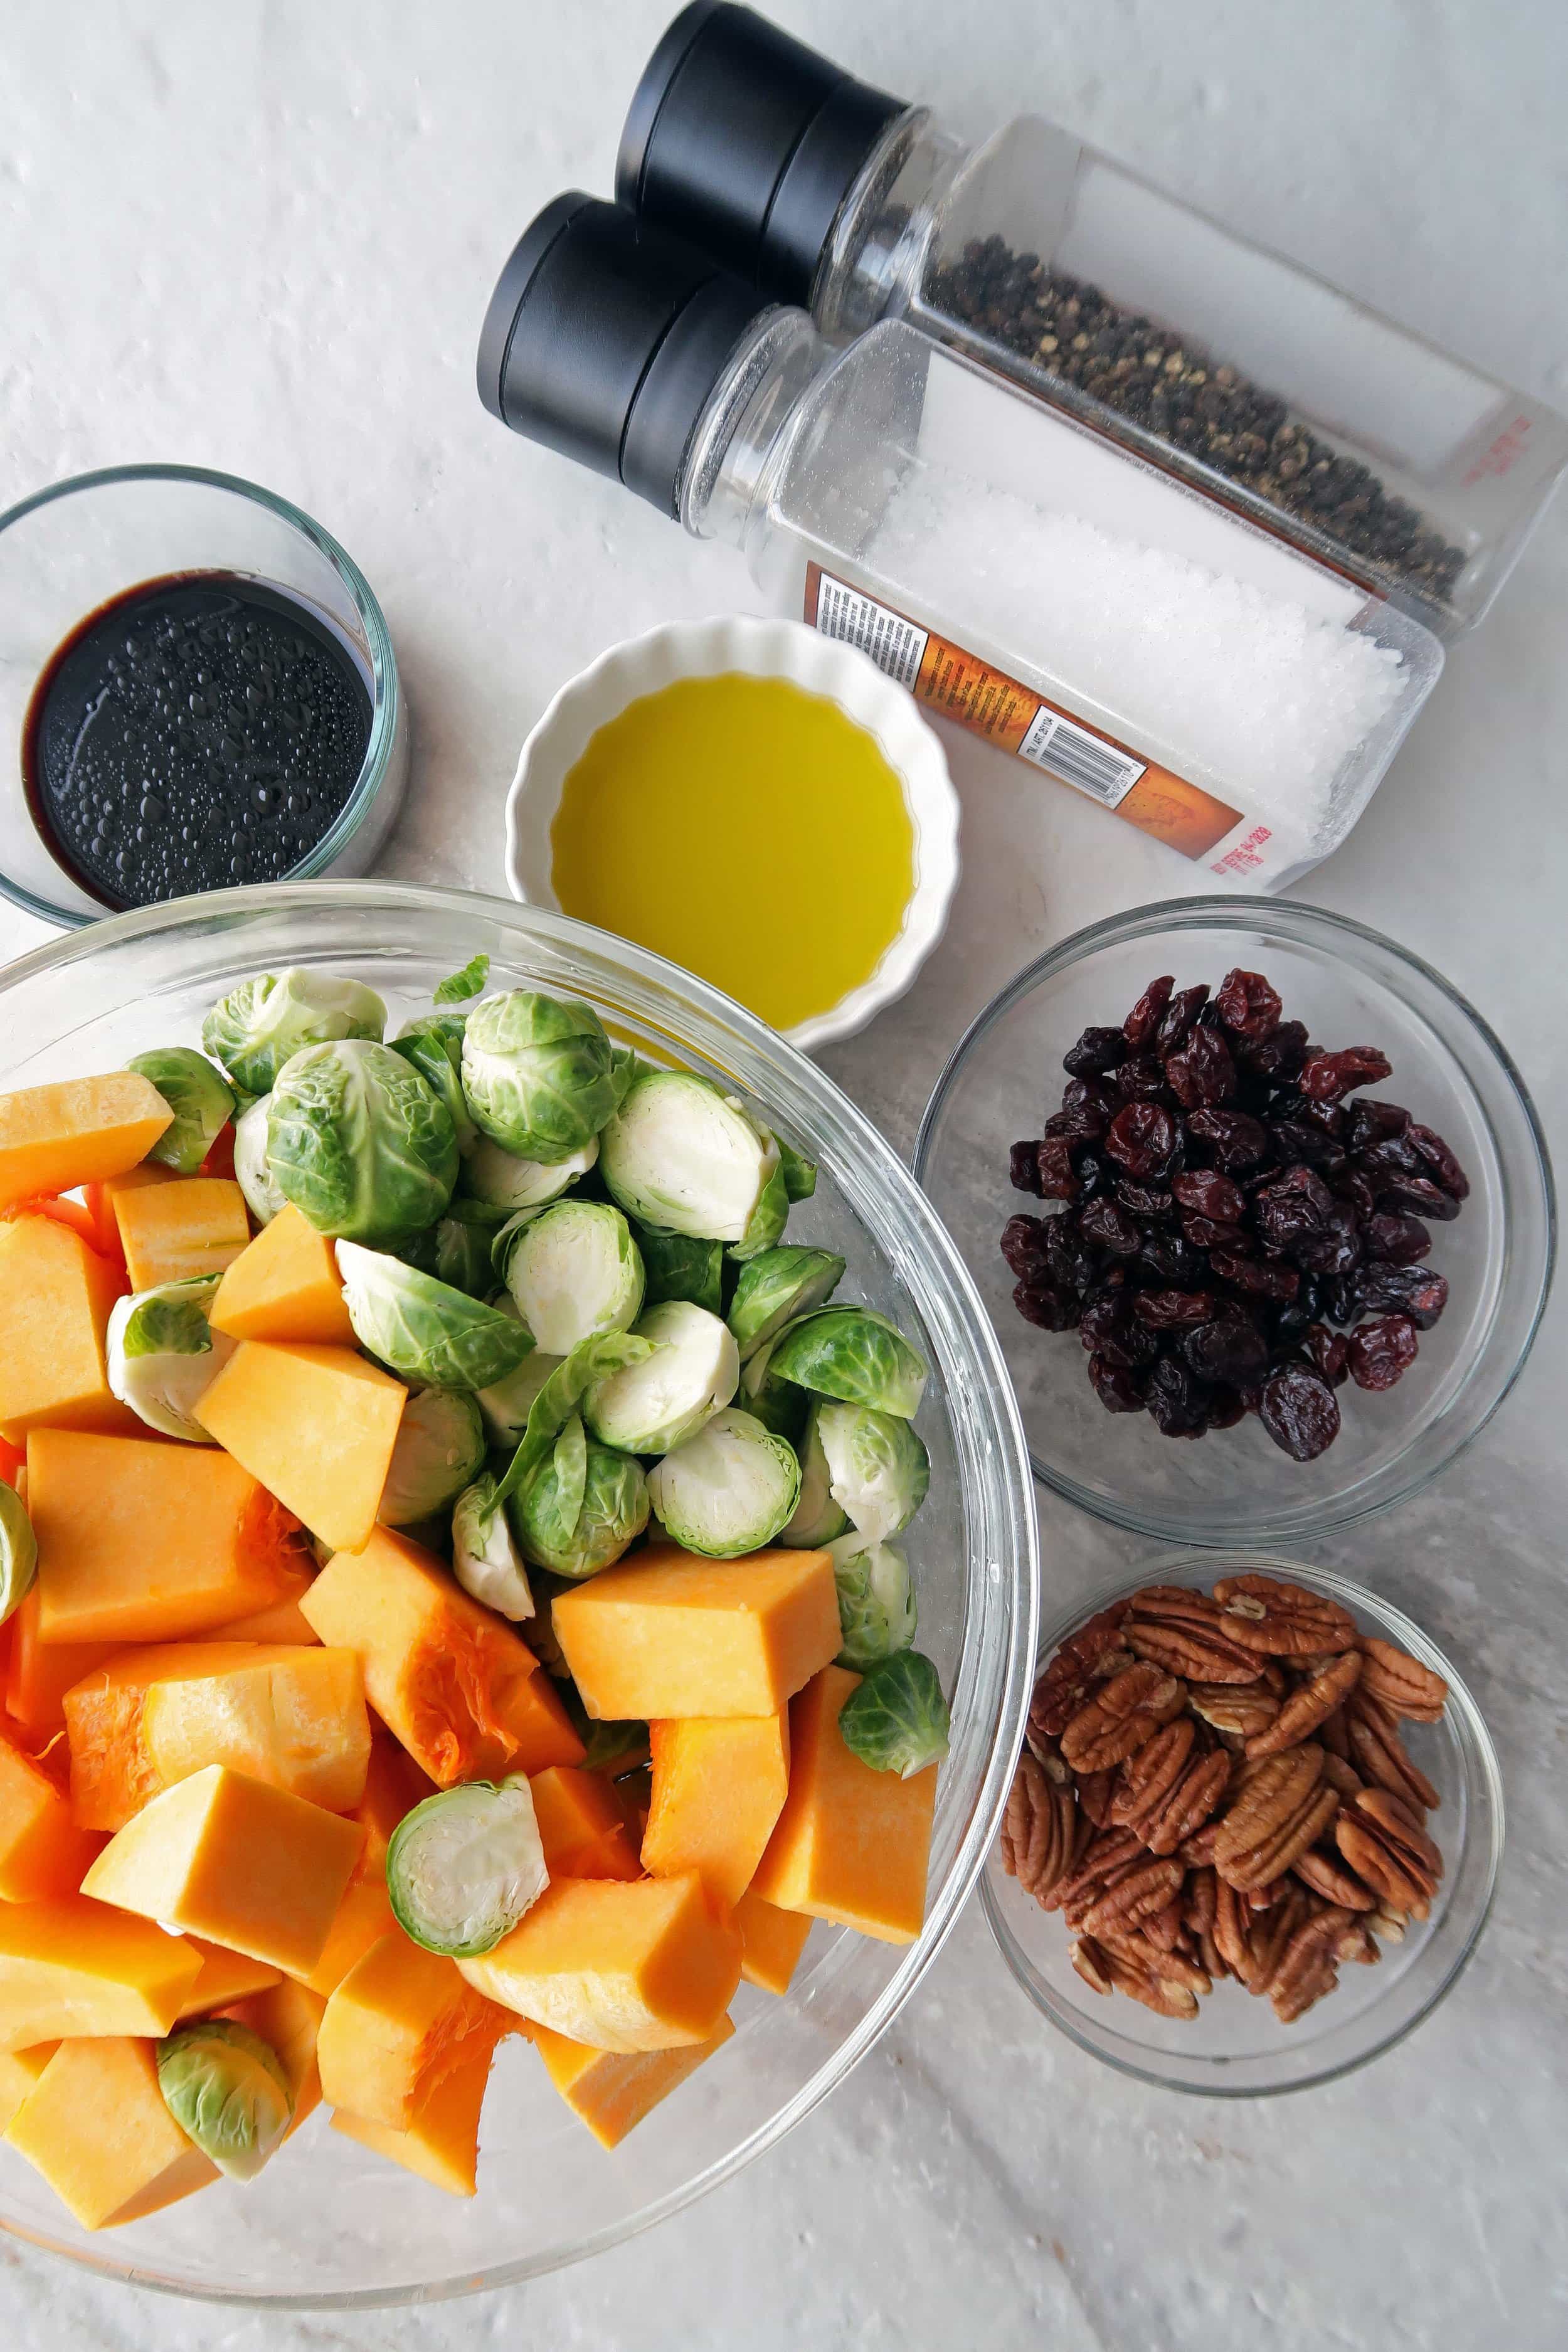 Chopped butternut squash, Brussels sprouts, pecans, dried cherries, balsamic vinegar, and oil in individual bowls.